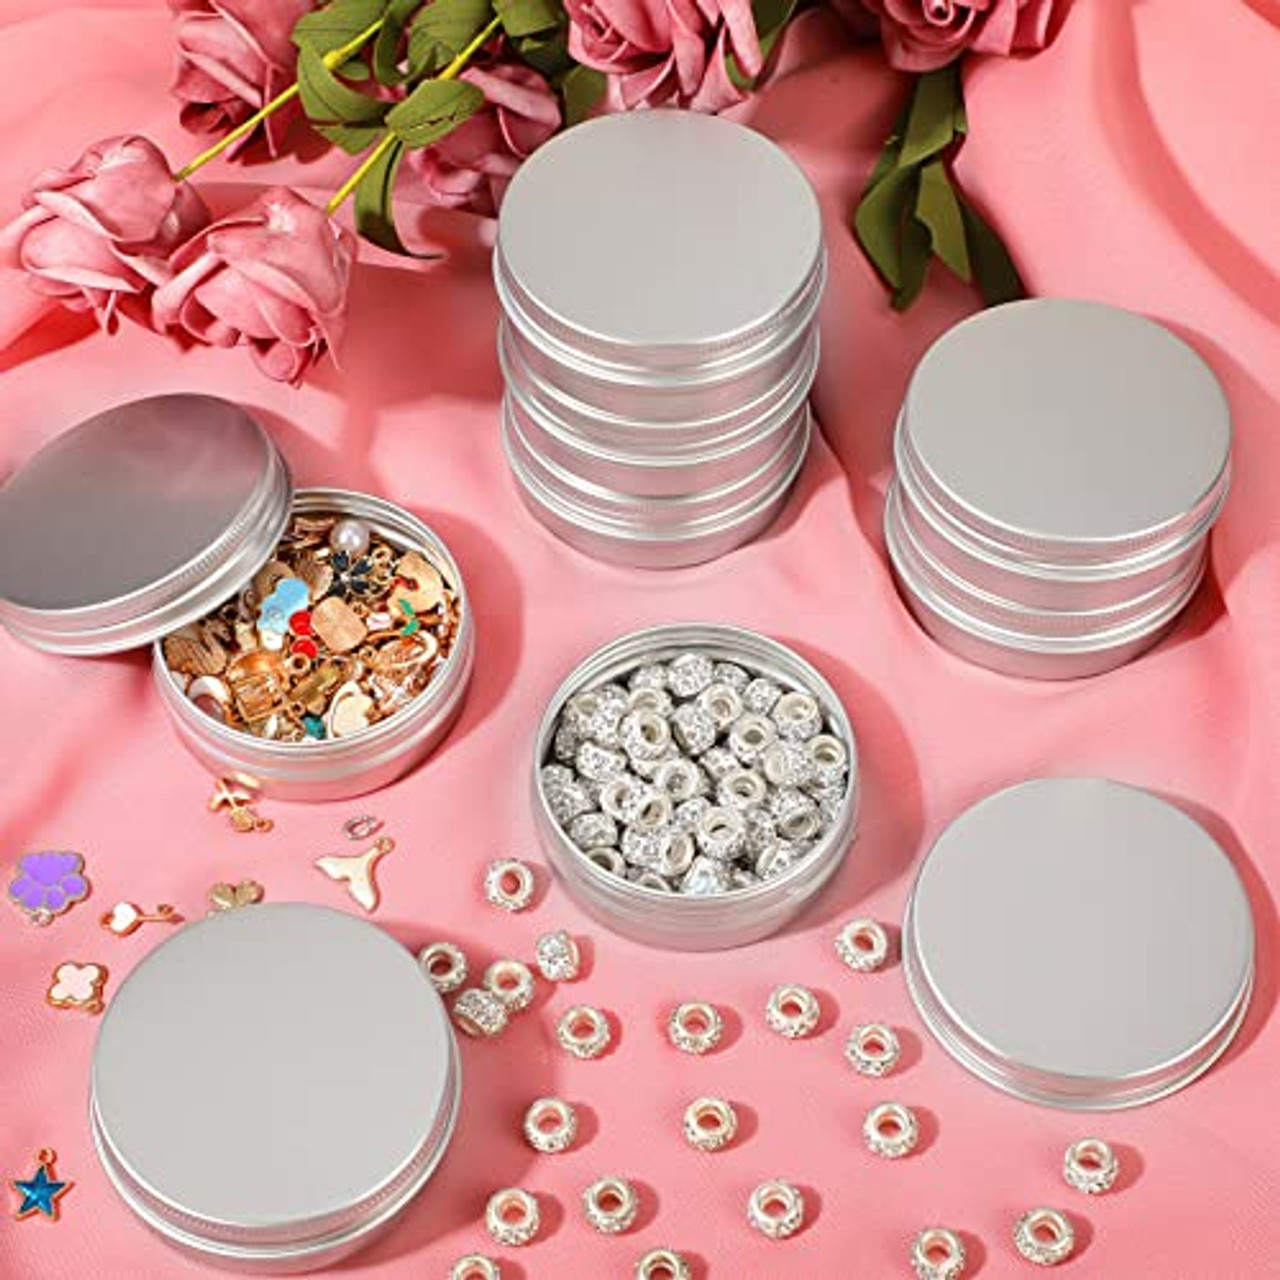 64 Pieces Screw Top Round Tin Cans Aluminum Tin Jar with Screw Lid, Lip  Balm Tin Containers Bottle Empty Travel Cosmetic Sample Tin Cans Container  for